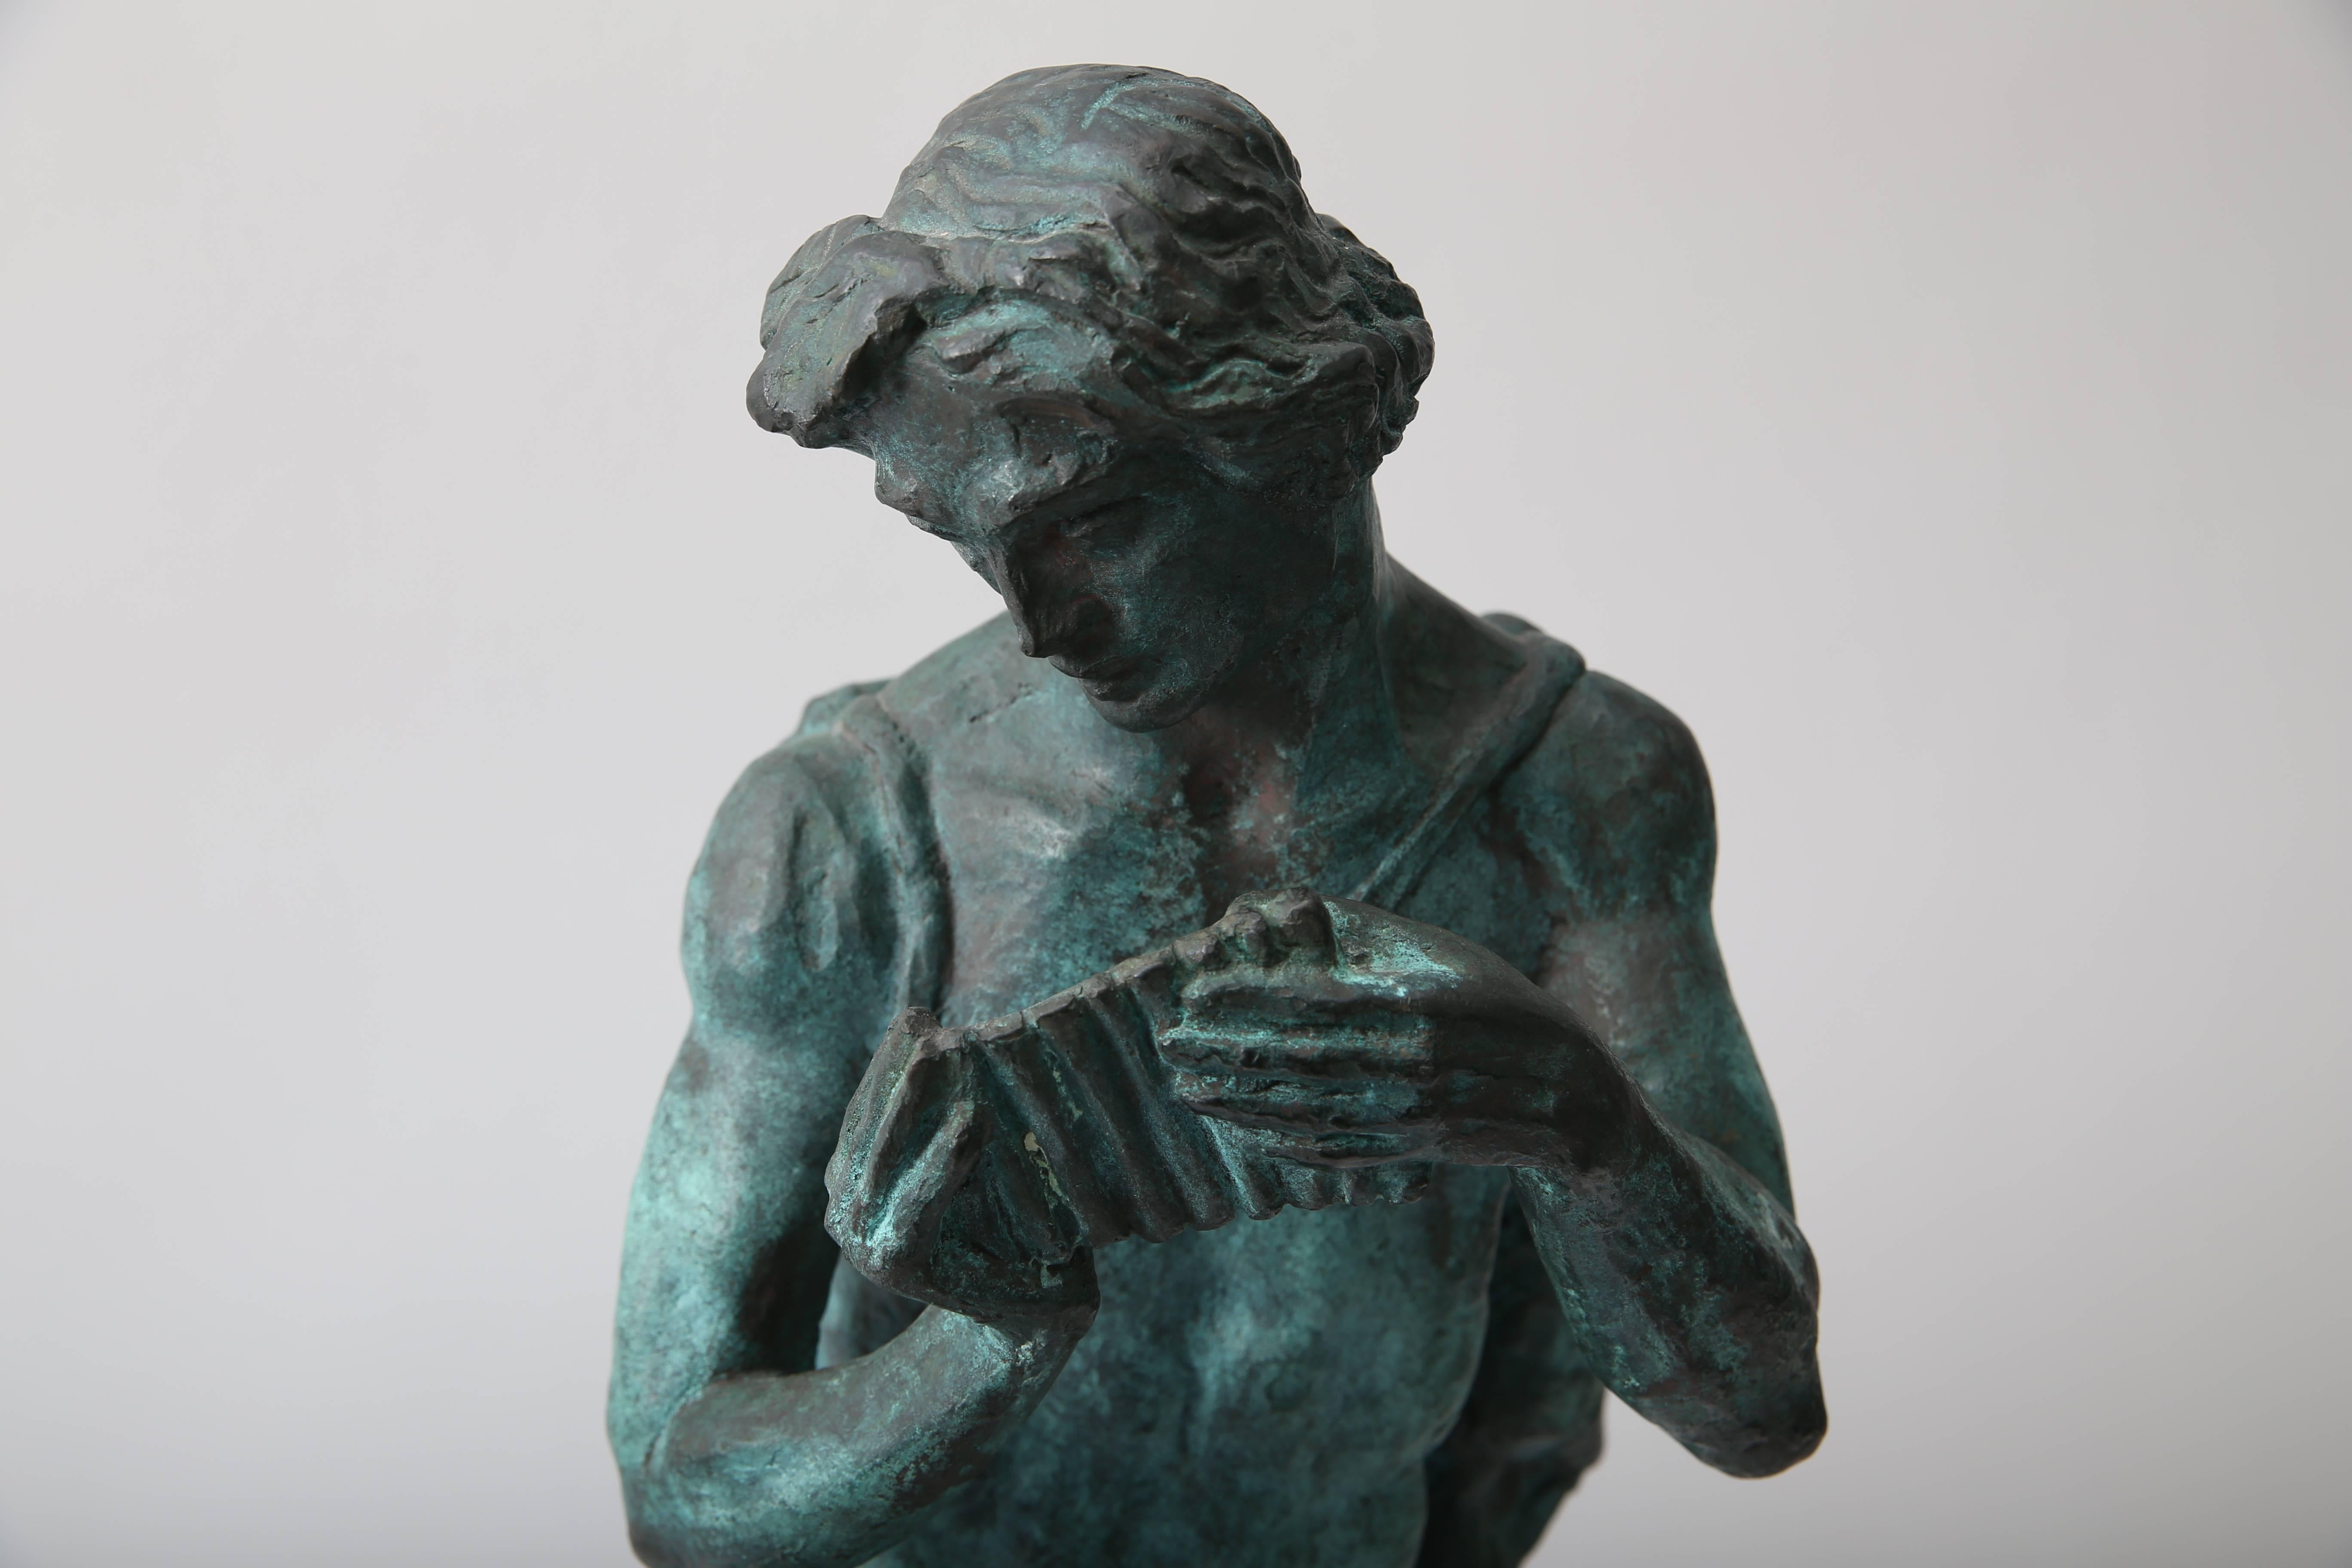 This beautiful Art Deco sculpture dates to 1937 and is by the Swedish sculptor Alice Nordin (1871-1948). Here she has captured the serenity and sensuality of a young shepherd playing the pan flute to a fawn.

Note: Inscribed on base see image